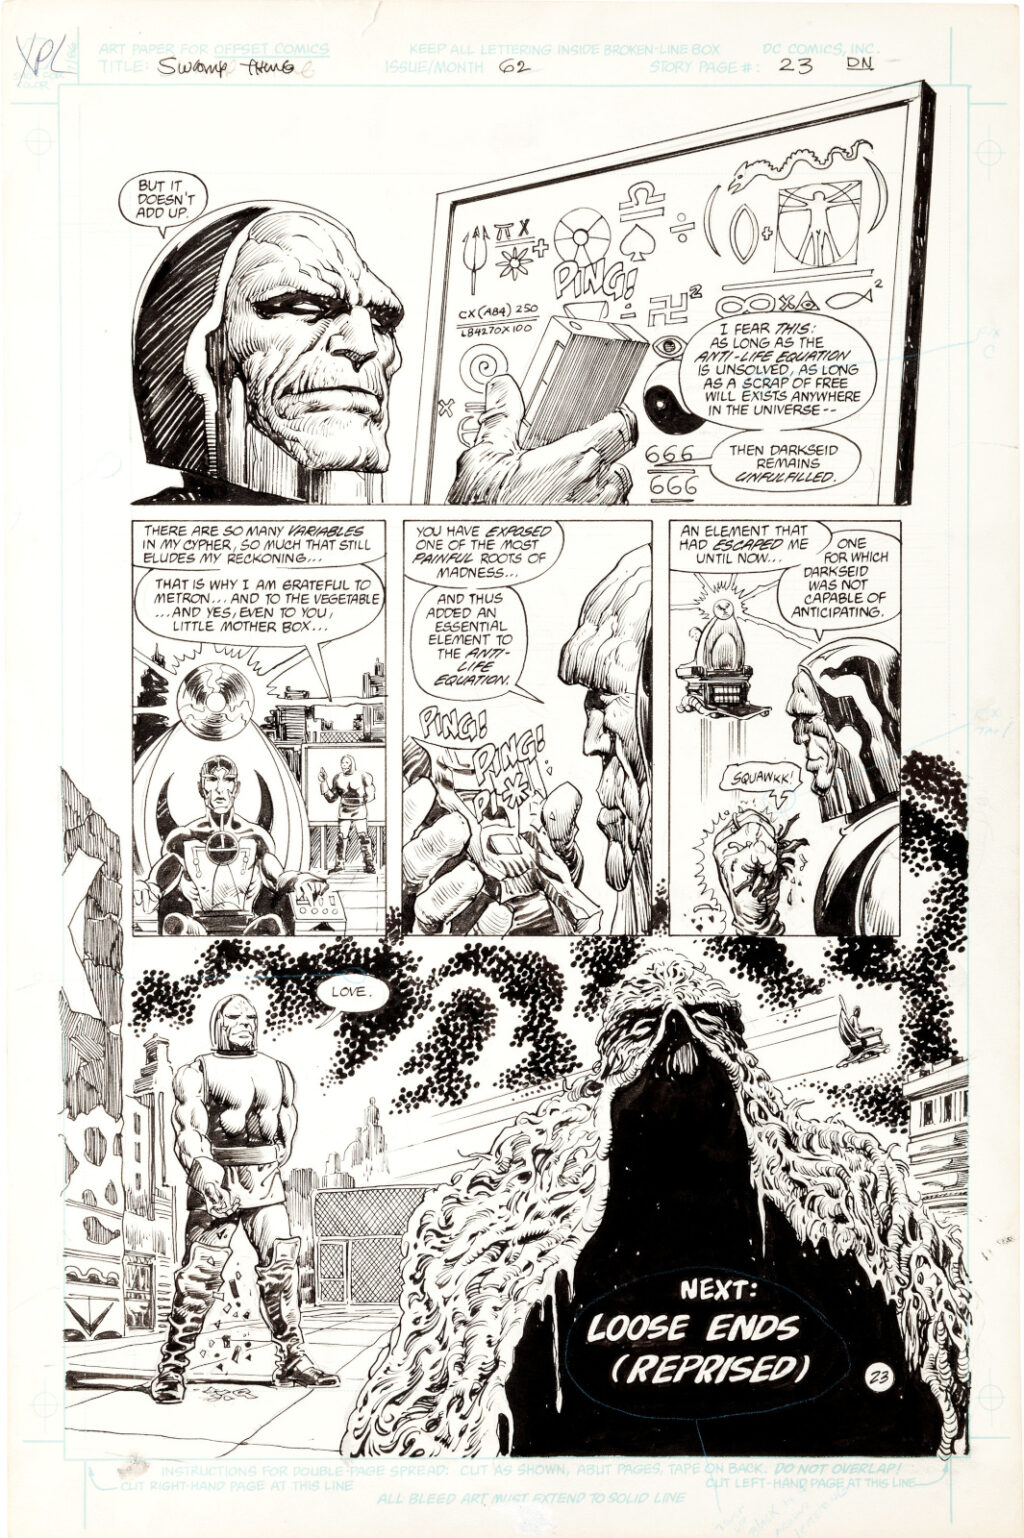 Swamp Thing issue 62 Pages 23 by Rick Veitch and Alfredo Alcala